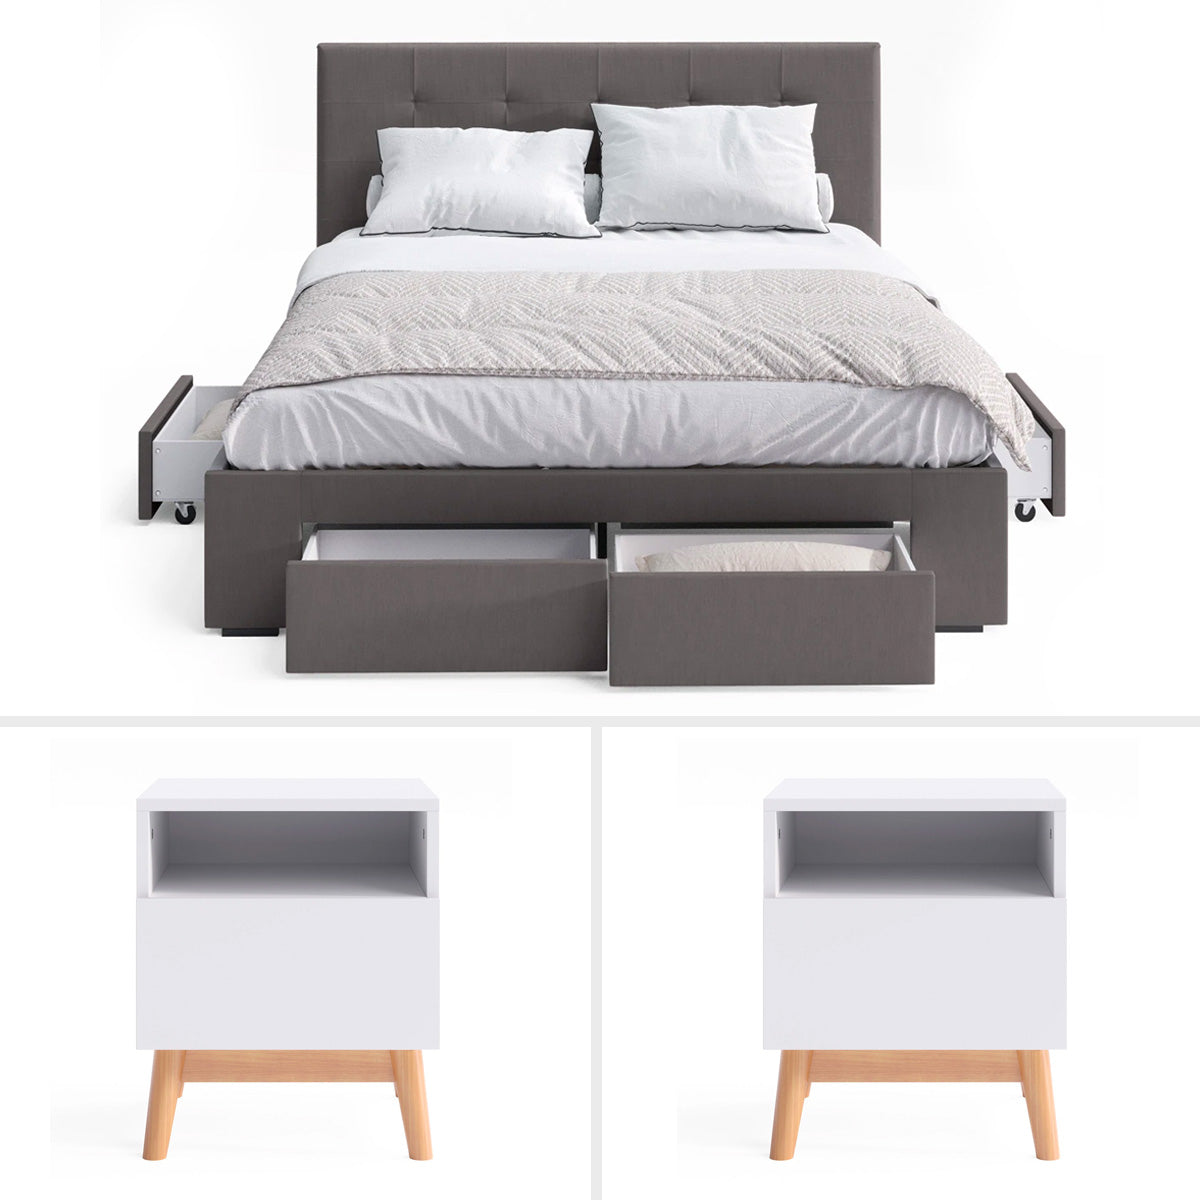 Charcoal Audrey Storage Bed Frame with Aspen Bedside Tables Package